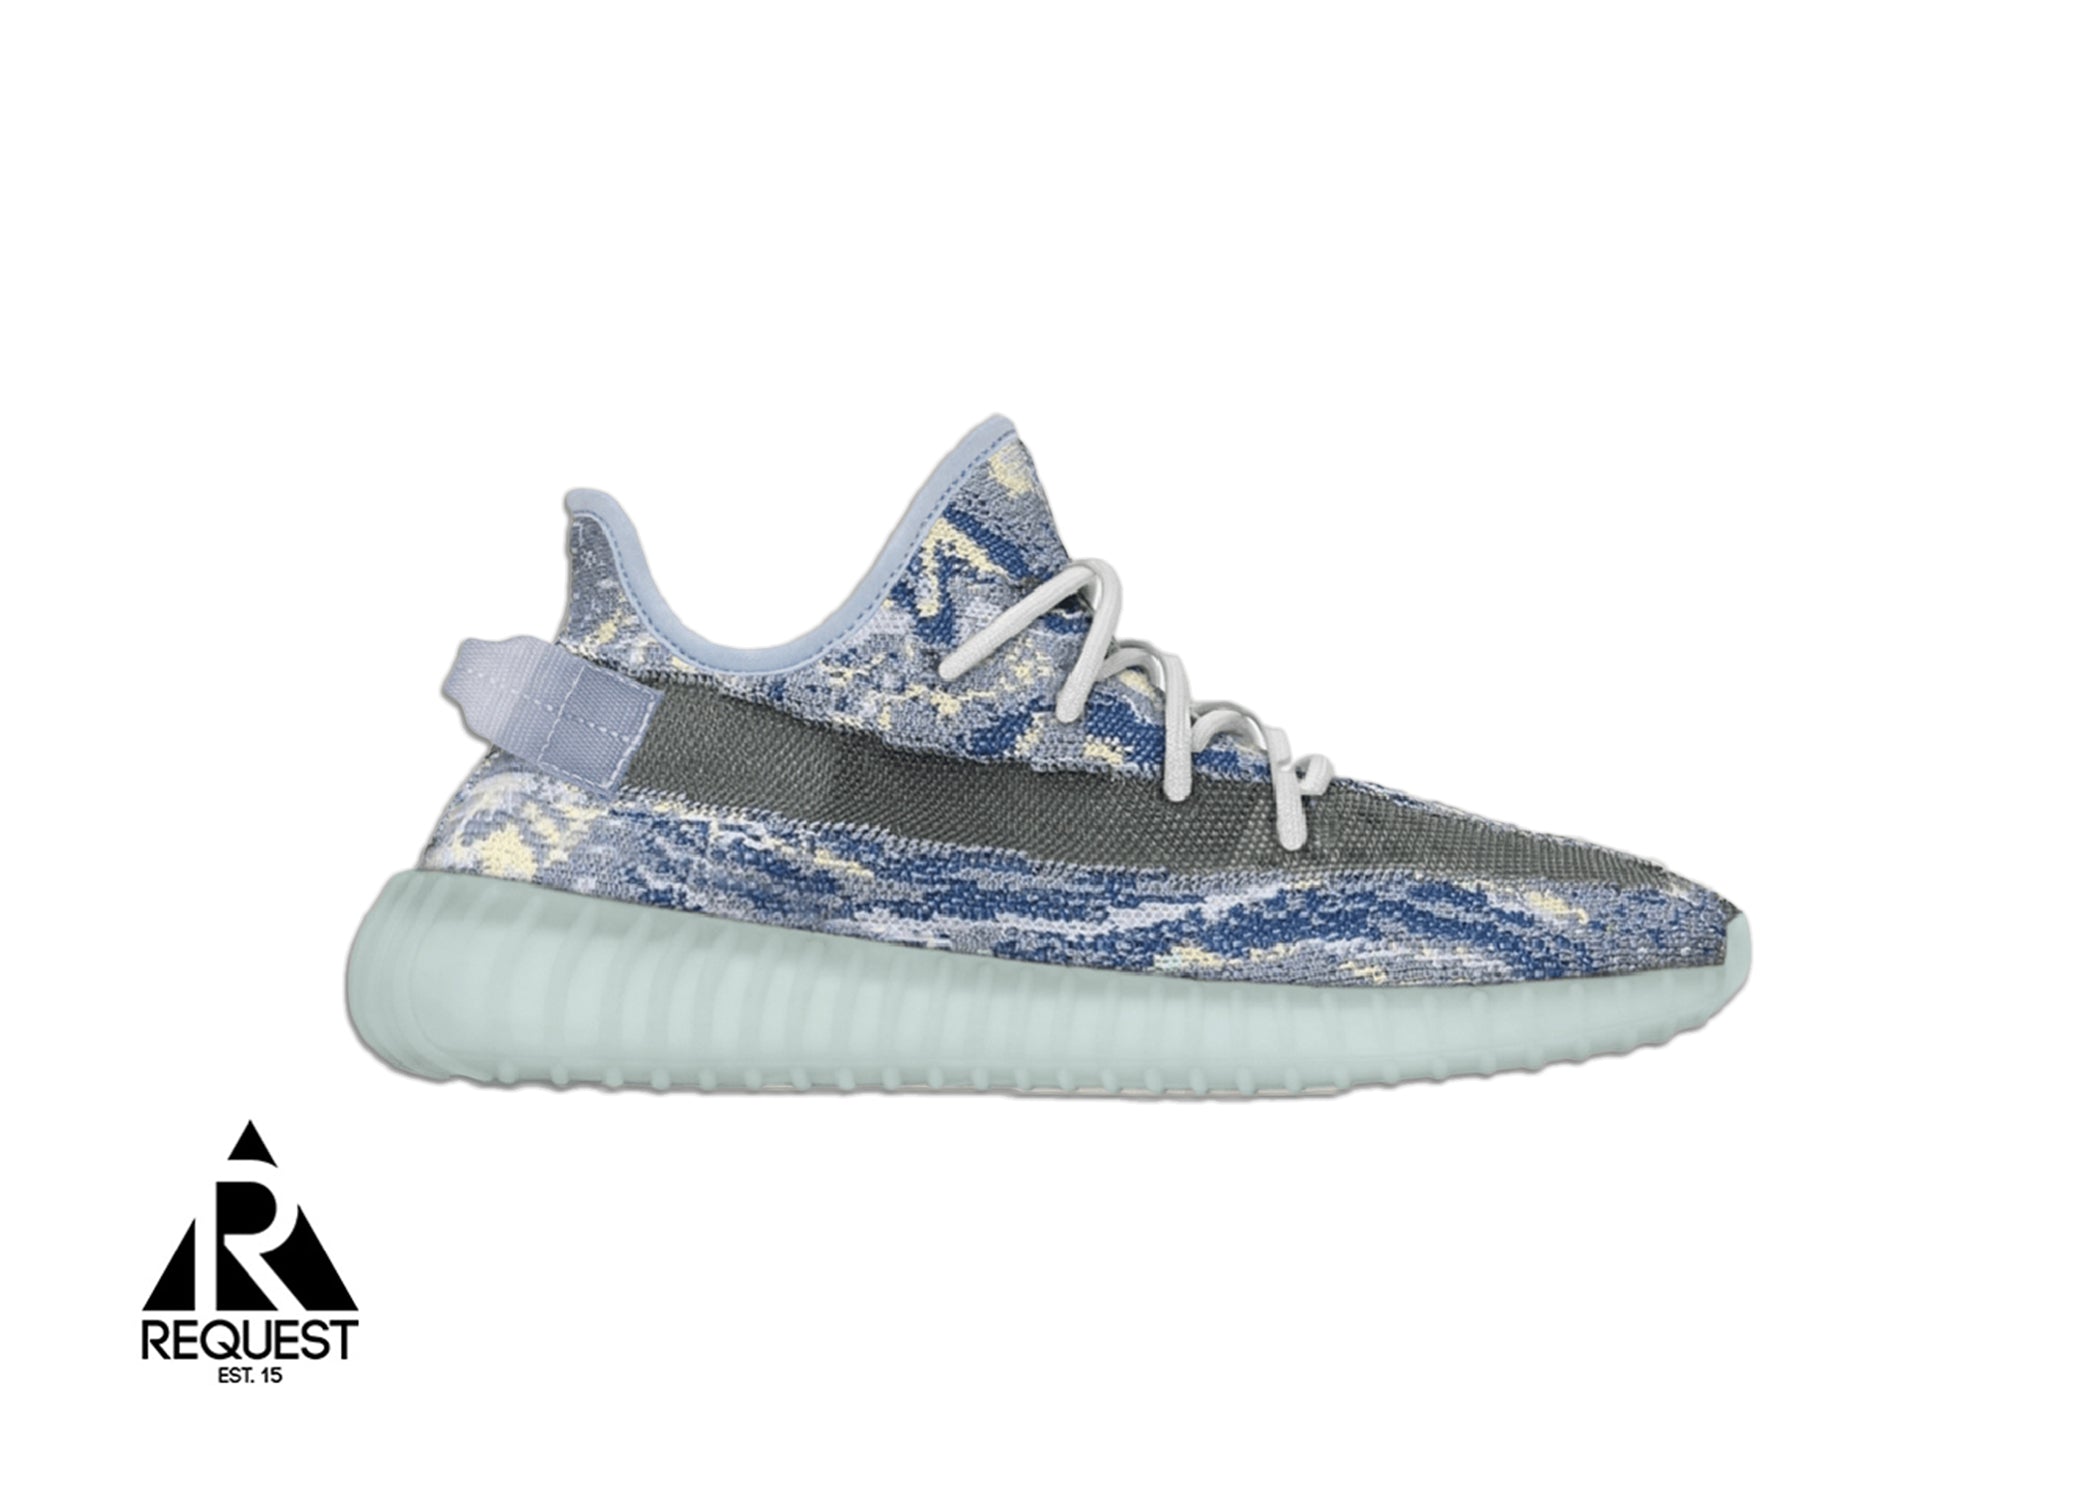 Adidas Yeezy Boost 350 V2 "MX Frost Blue"